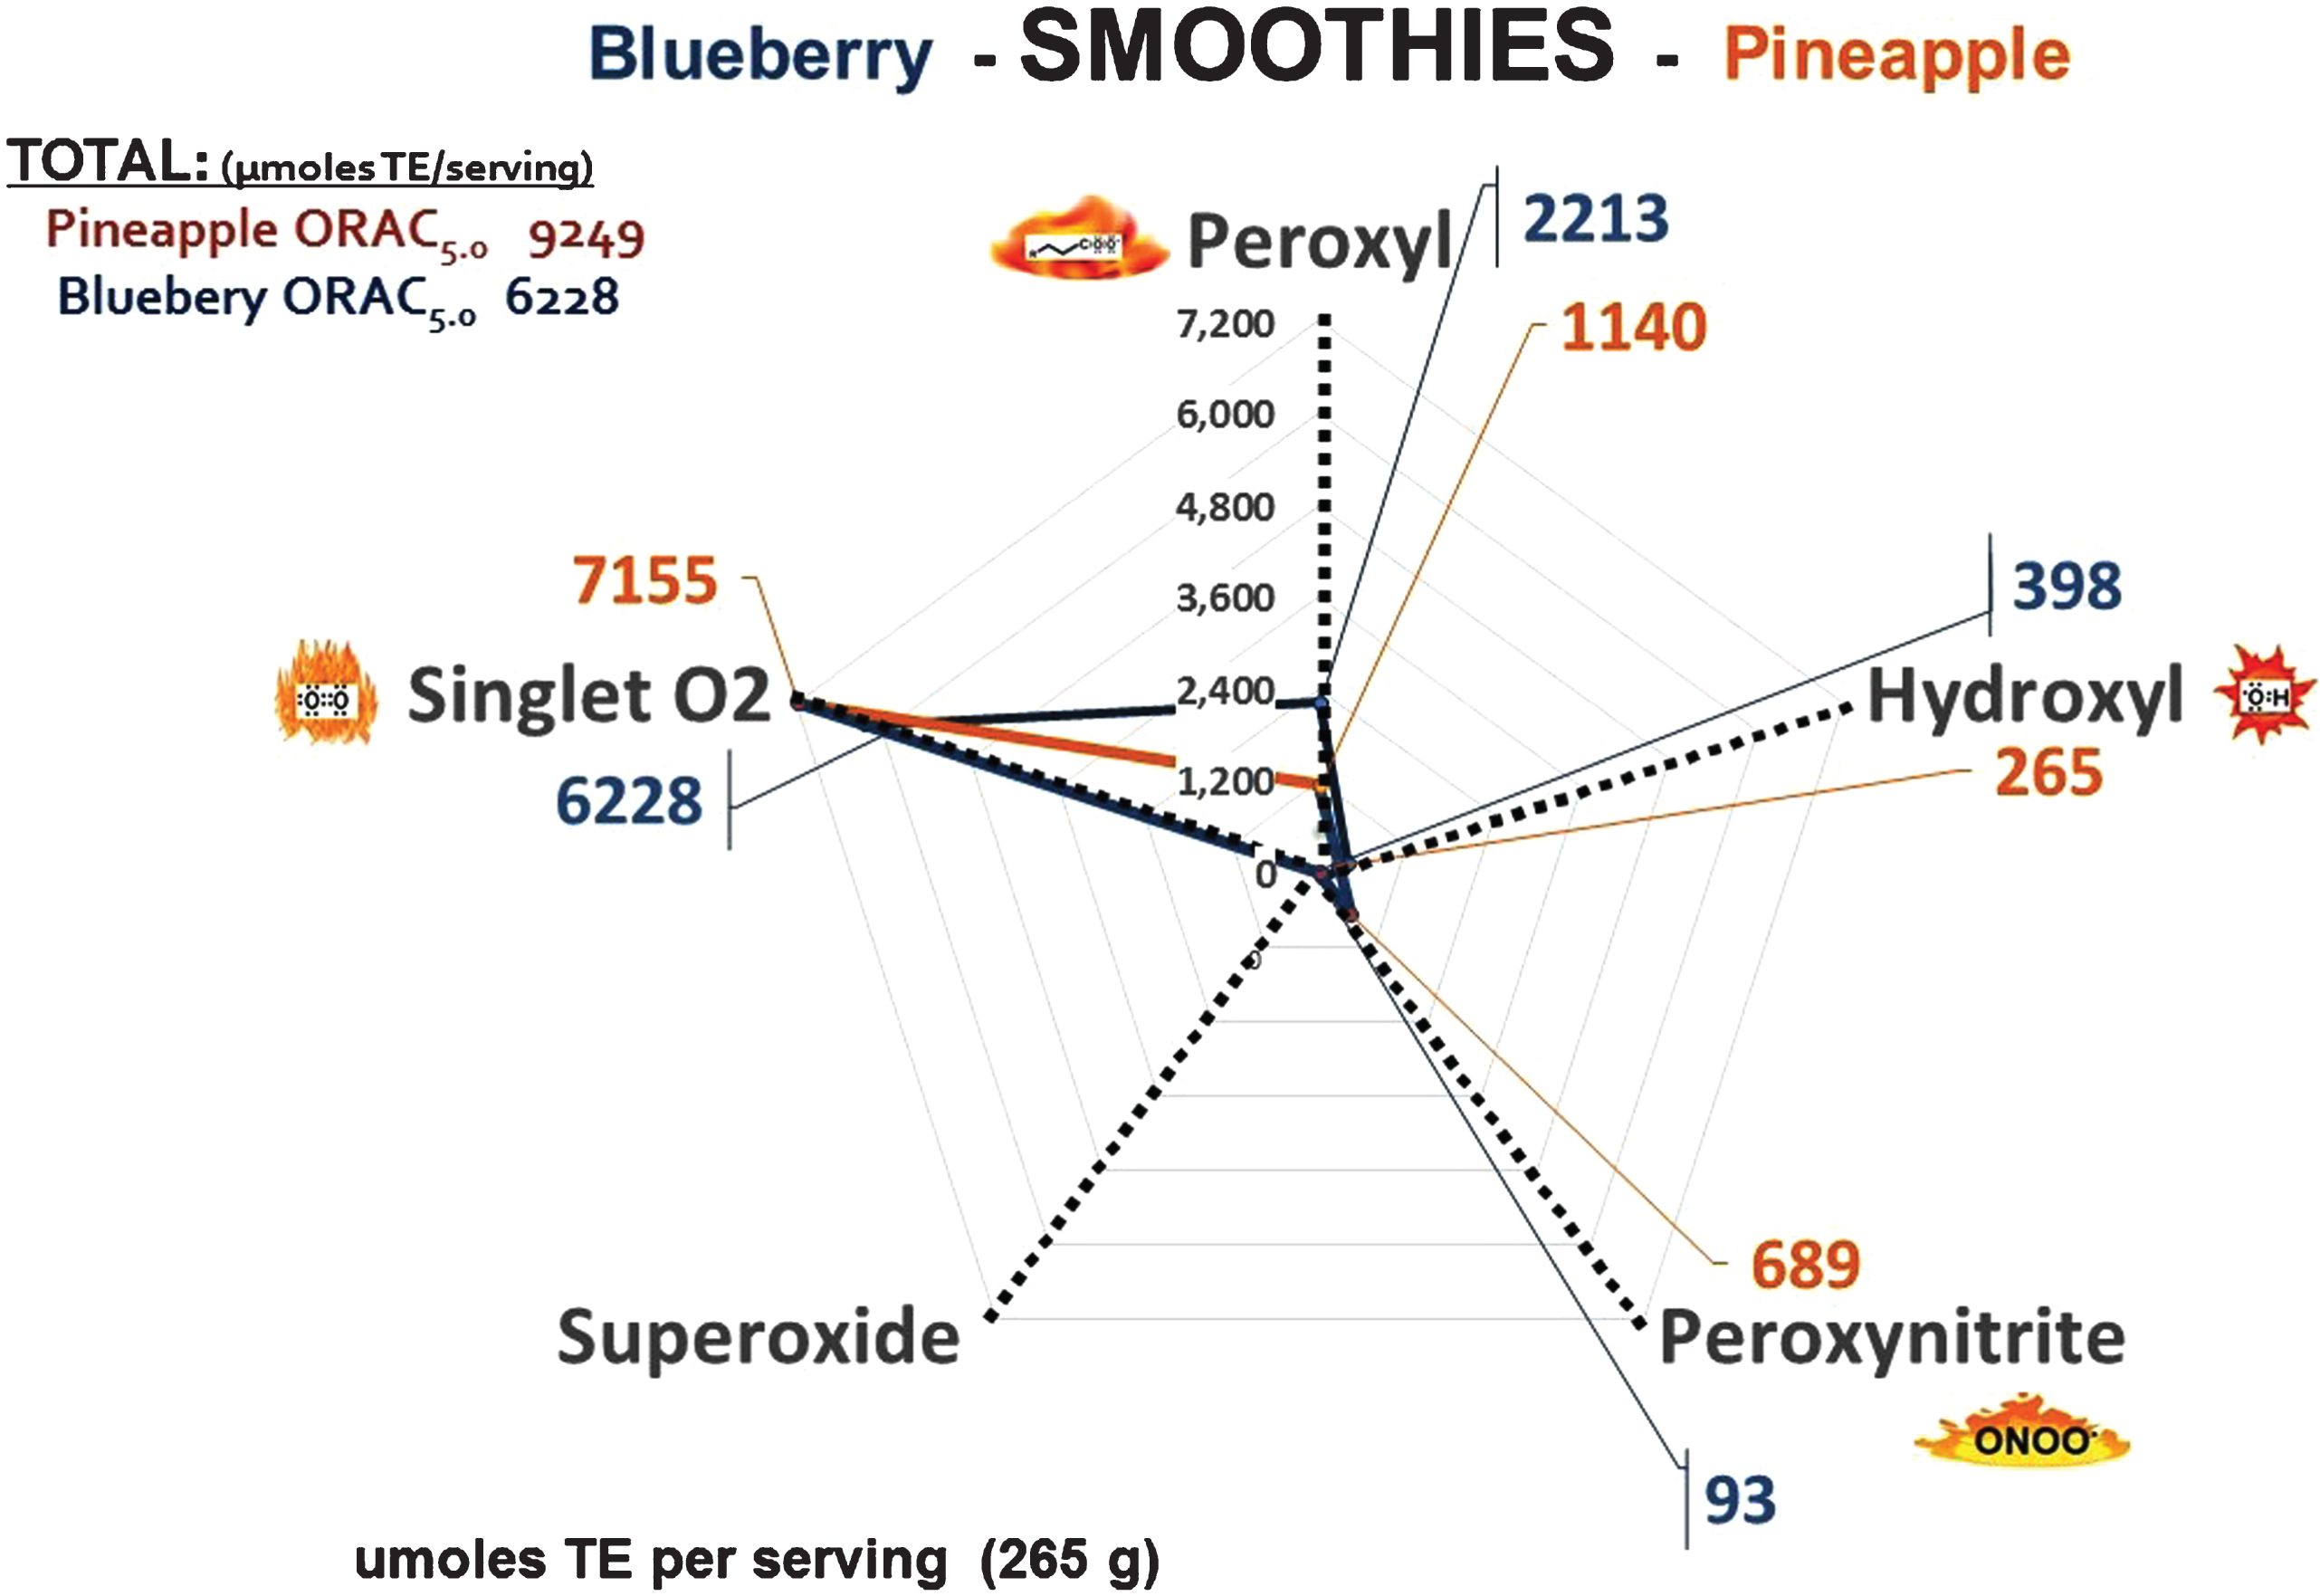 Radial plot comparison of blueberry/pomegranate and Mango/pineapple smoothes. Antioxidant data expressed as μmole TE/serving (265 g). Values for each radical indicated on the respective radial arm.